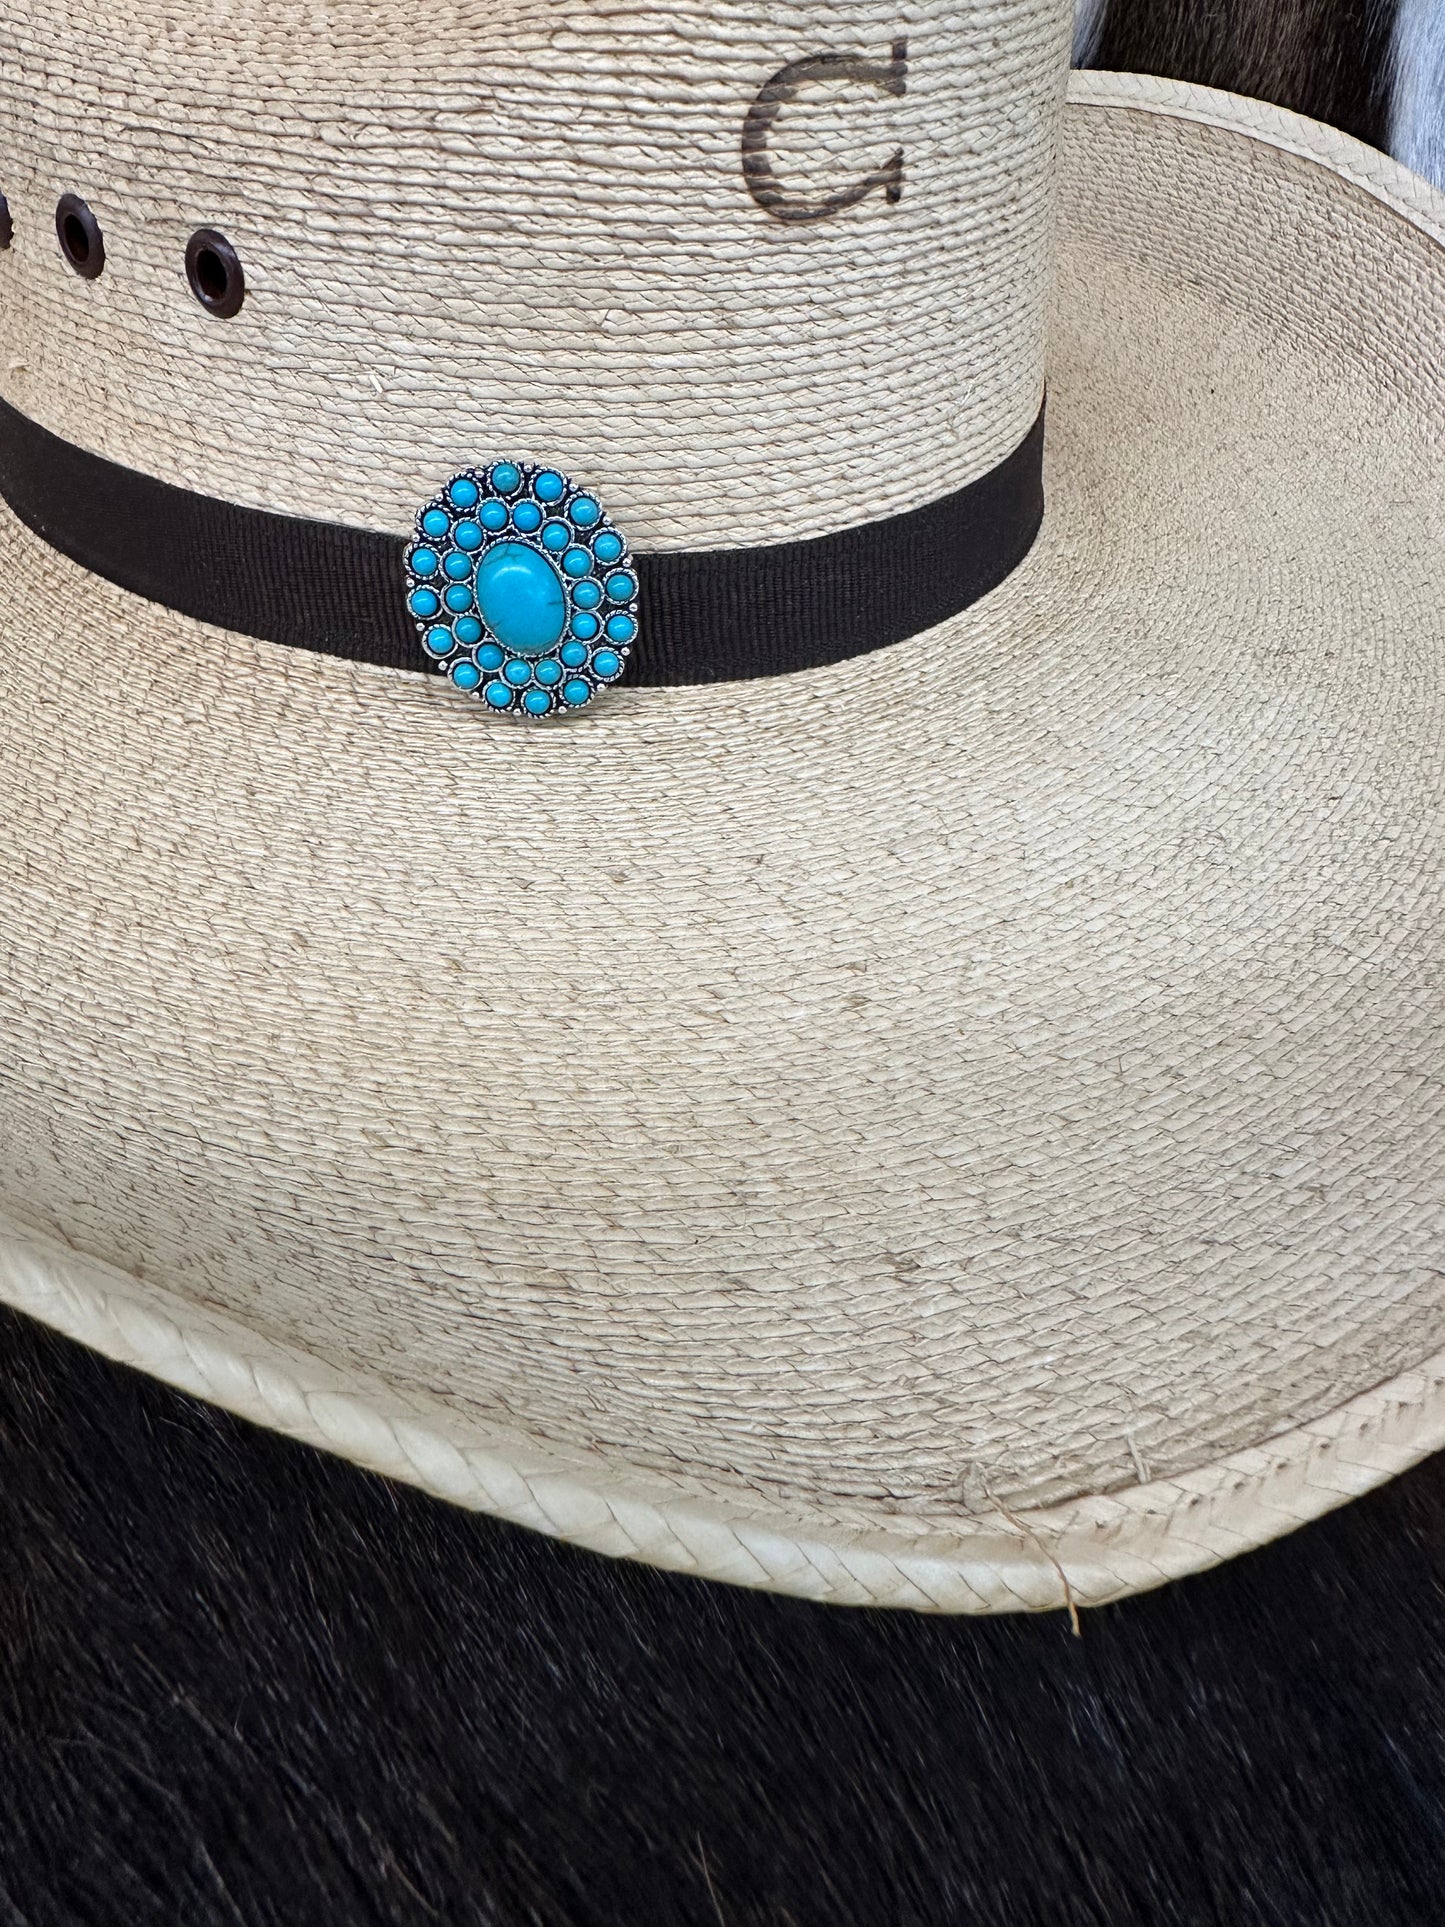 The Turquoise is My Love Language Hat Pin